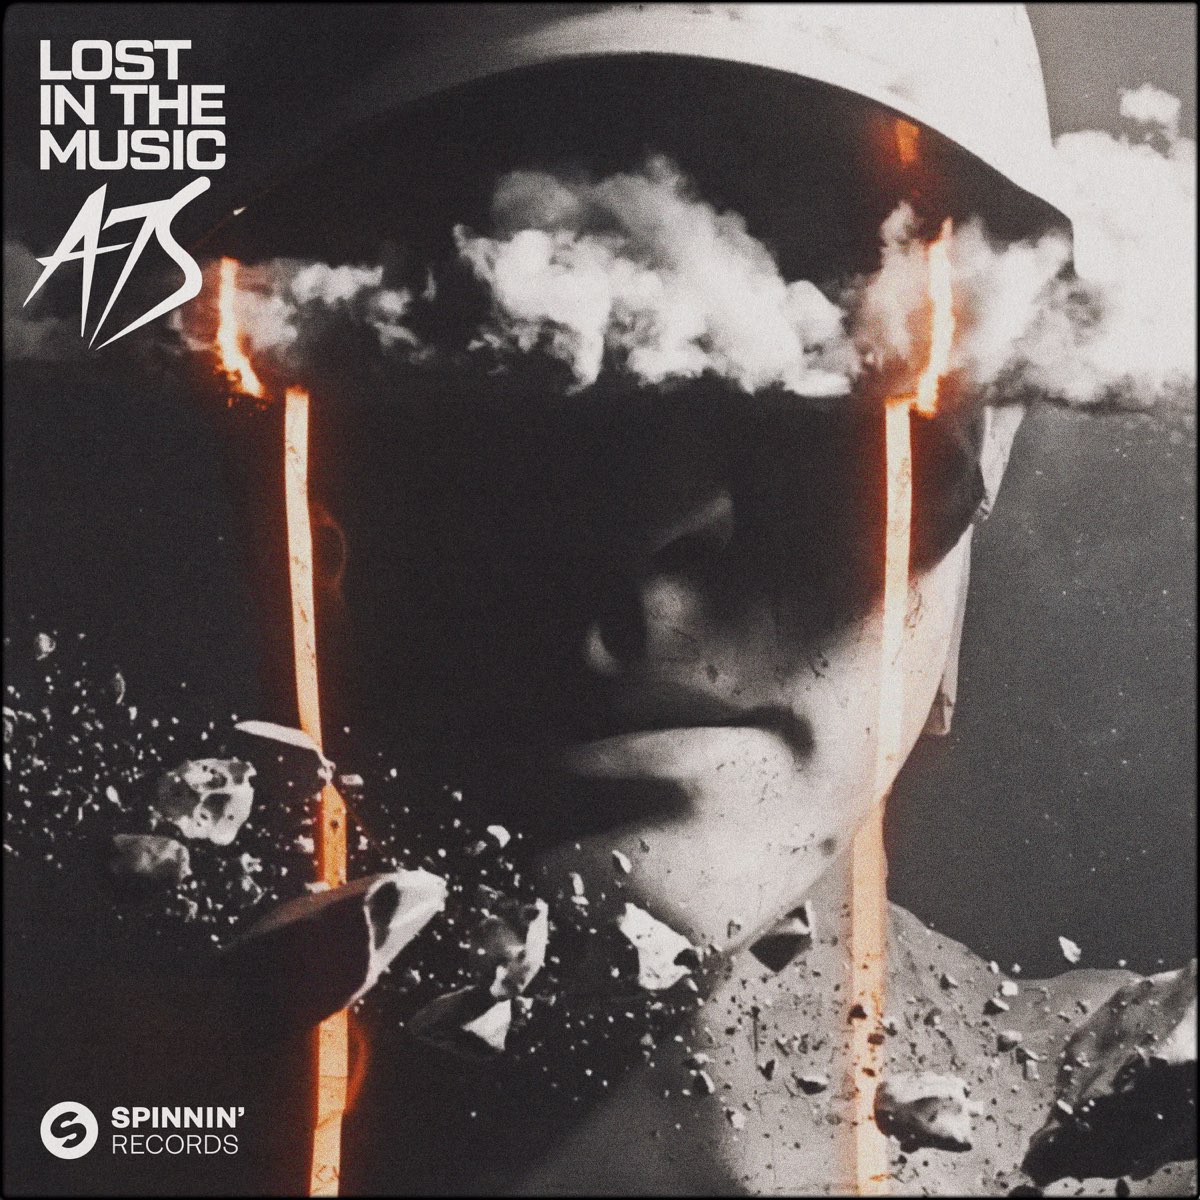 A7S Lost In The Music cover artwork